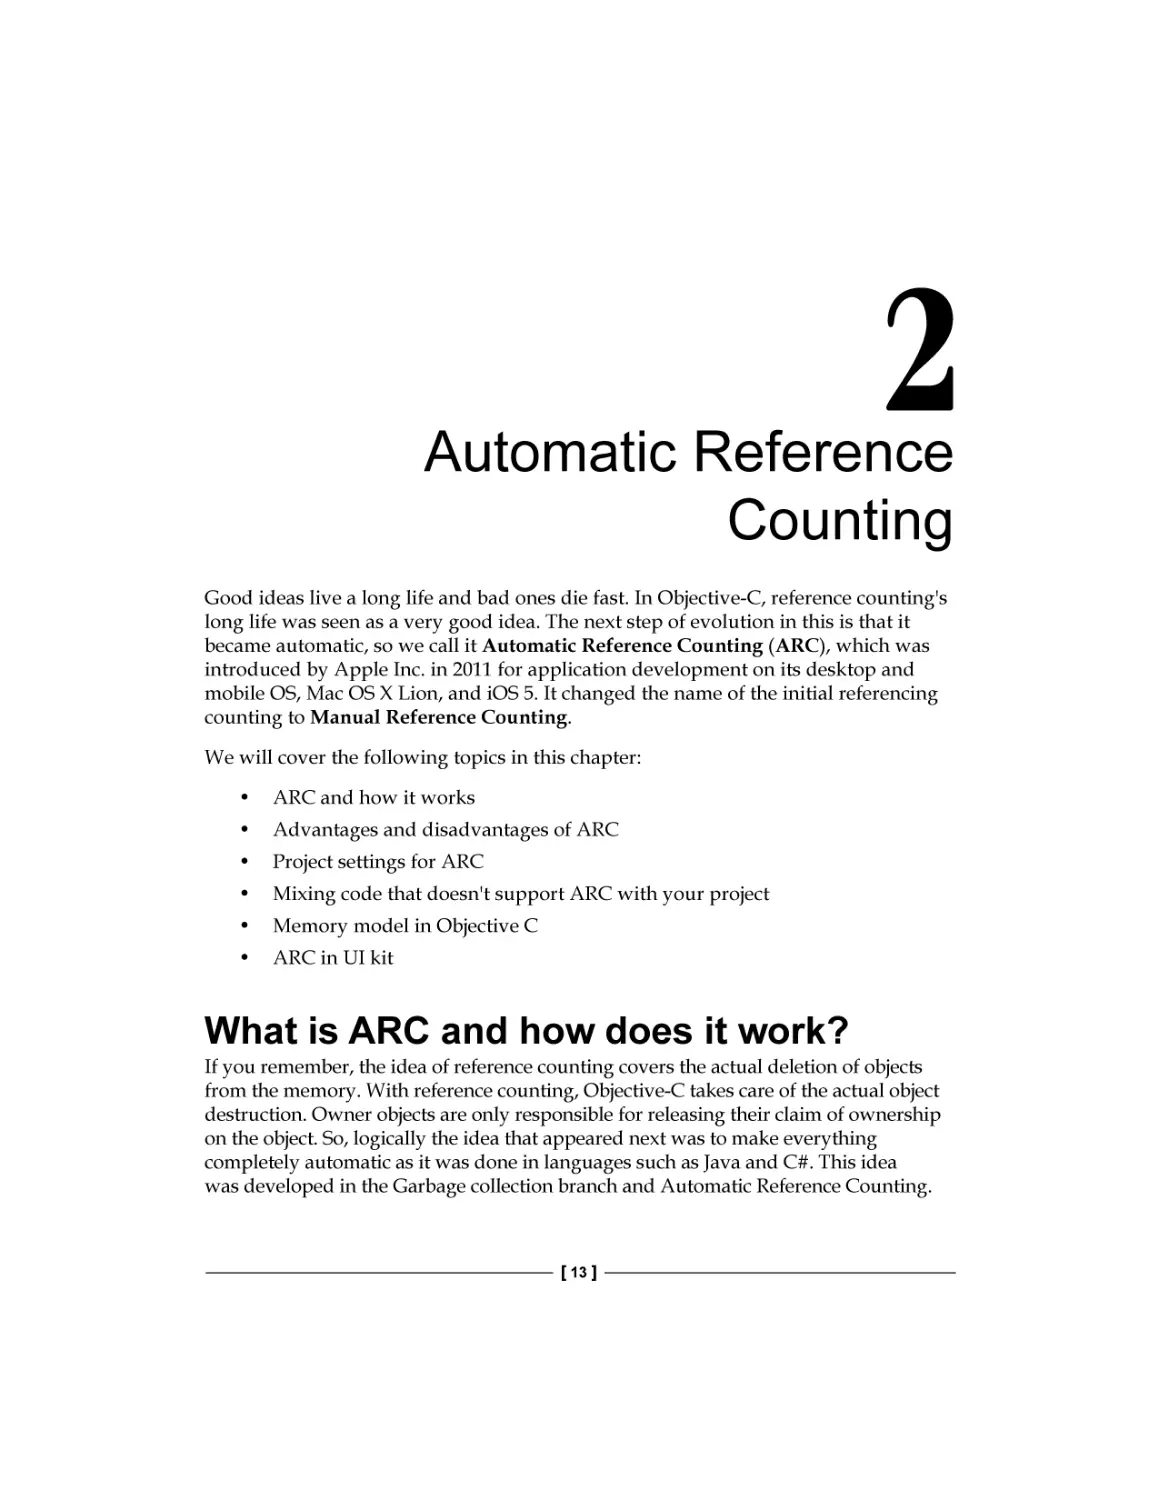 Chapter 2
What is ARC and how does it work?